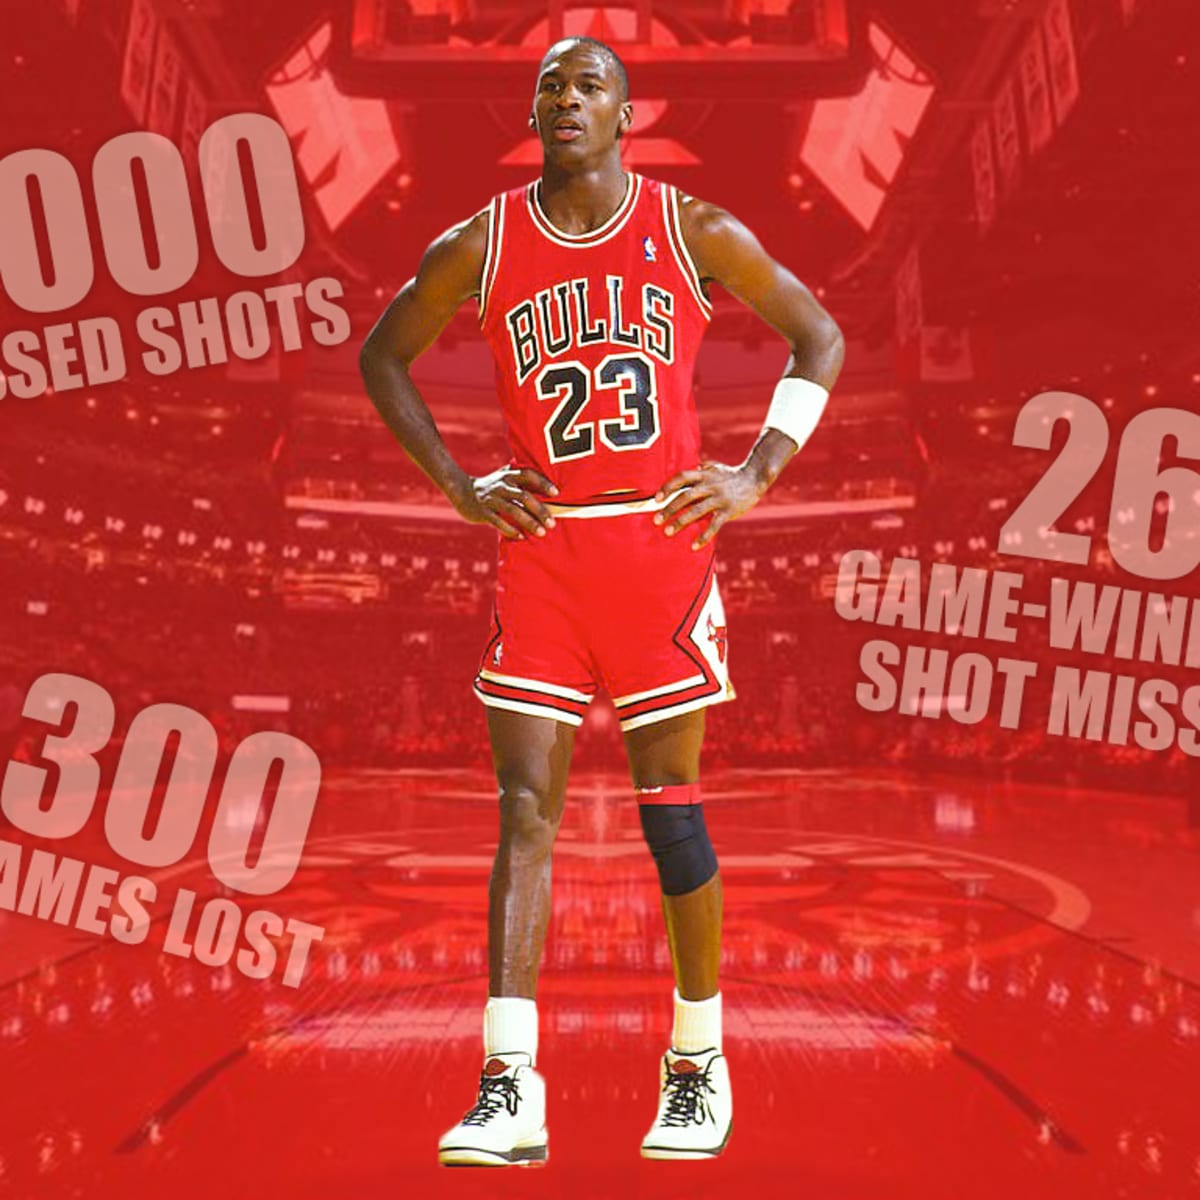 Top Moments: With one shot, Michael Jordan says farewell and